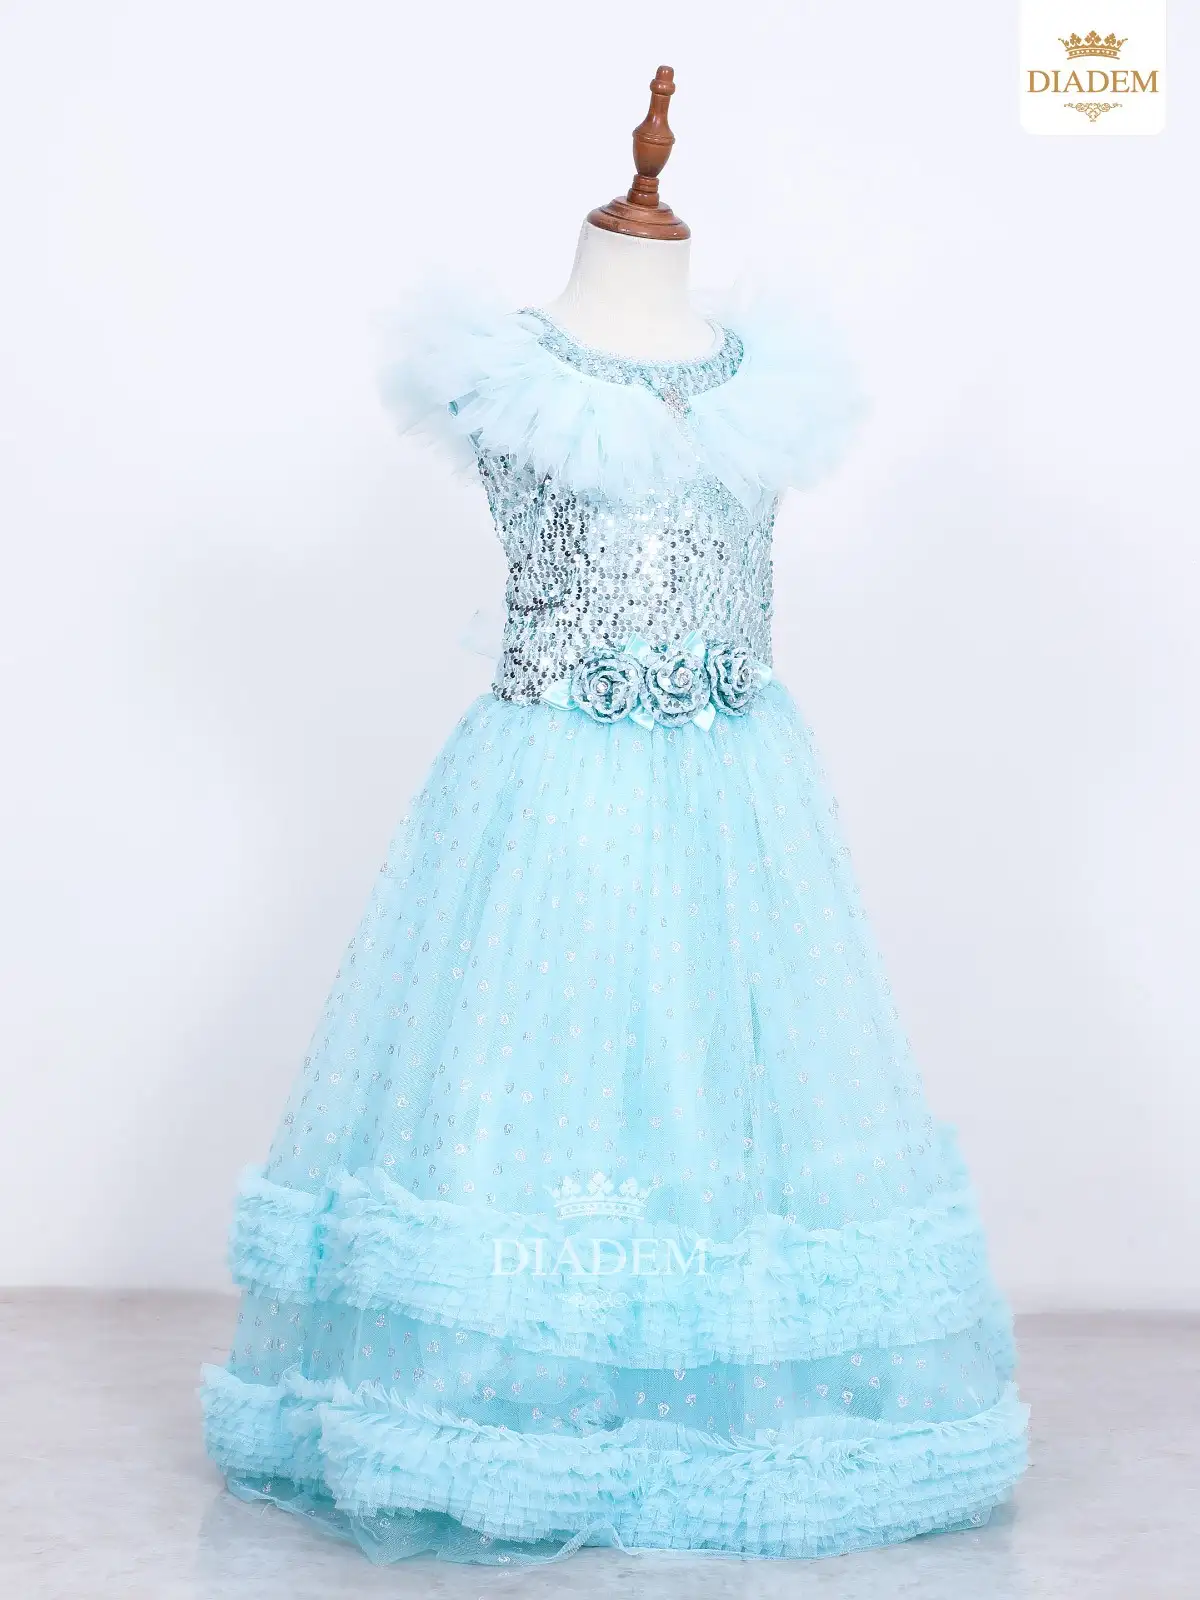 Sky Blue Gown Embellished In Sequins With Frilled Bottom